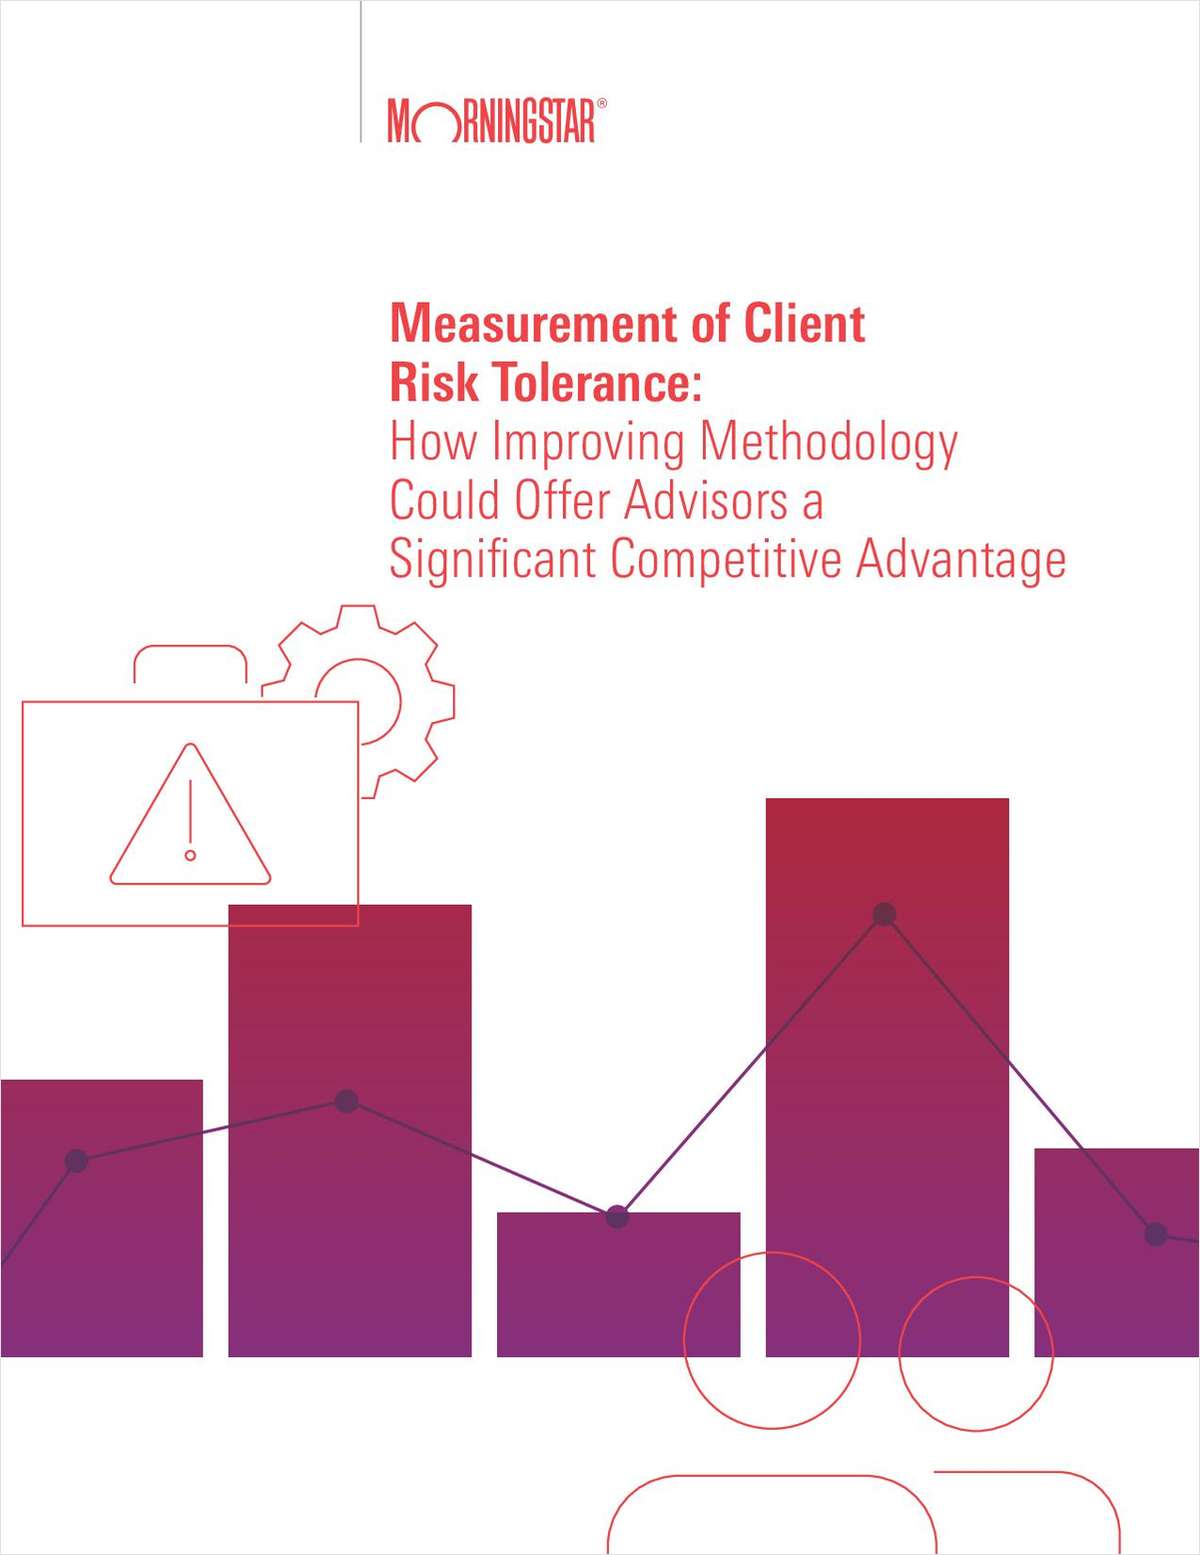 Measurement of Client Risk Tolerance: How Improving Methodology Could Offer Advisors a Significant Competitive Advantage